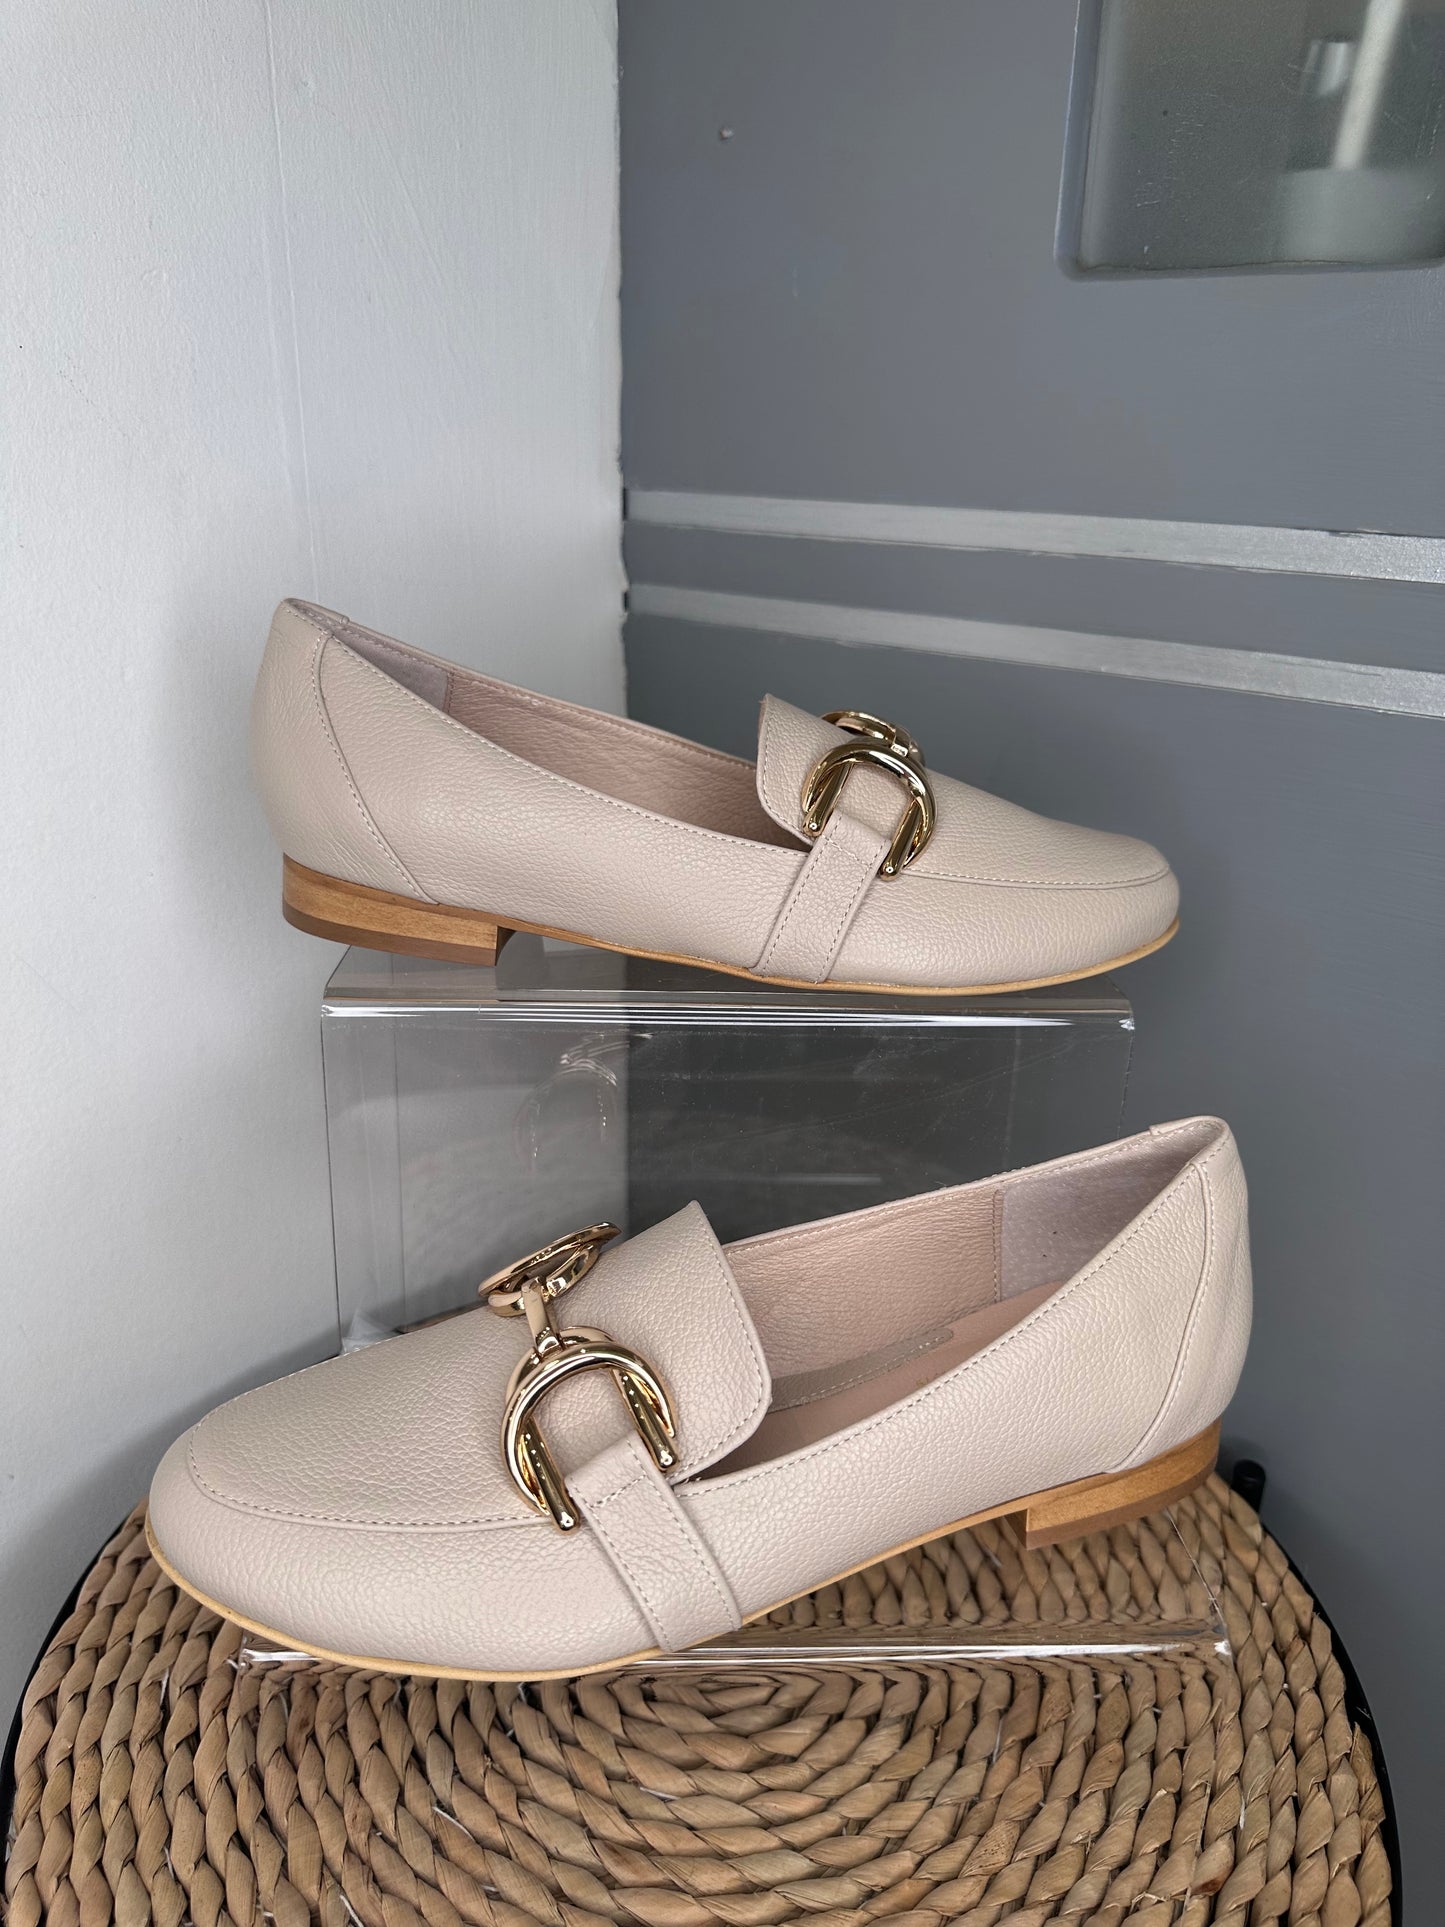 Emis - Soft Cream Loafer With Gold Chain Trim